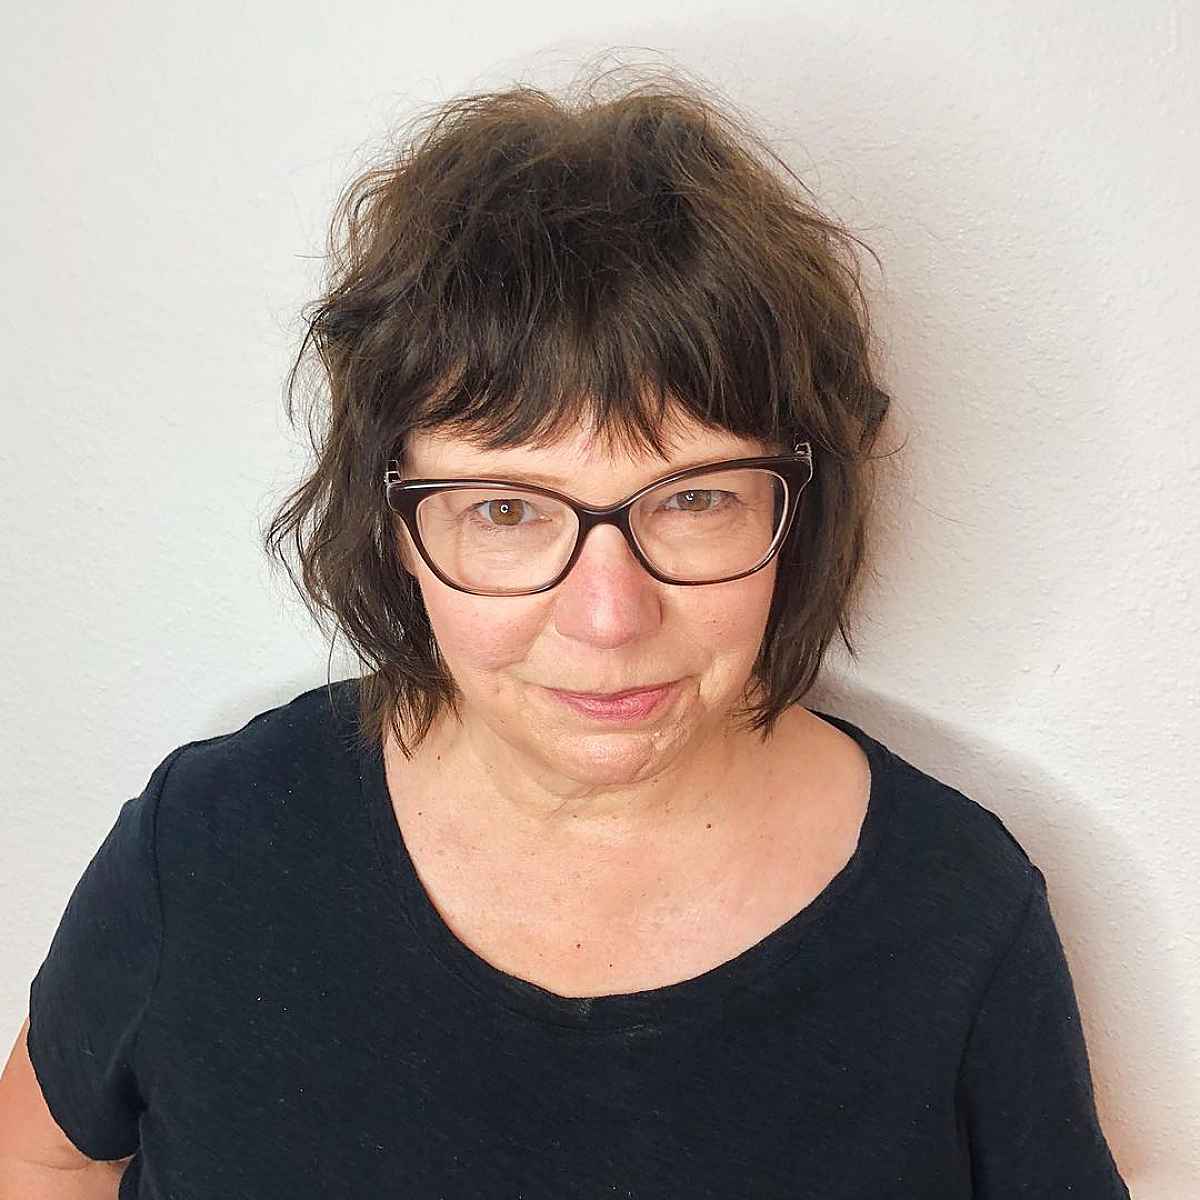 Chin-length shaggy cut with glasses